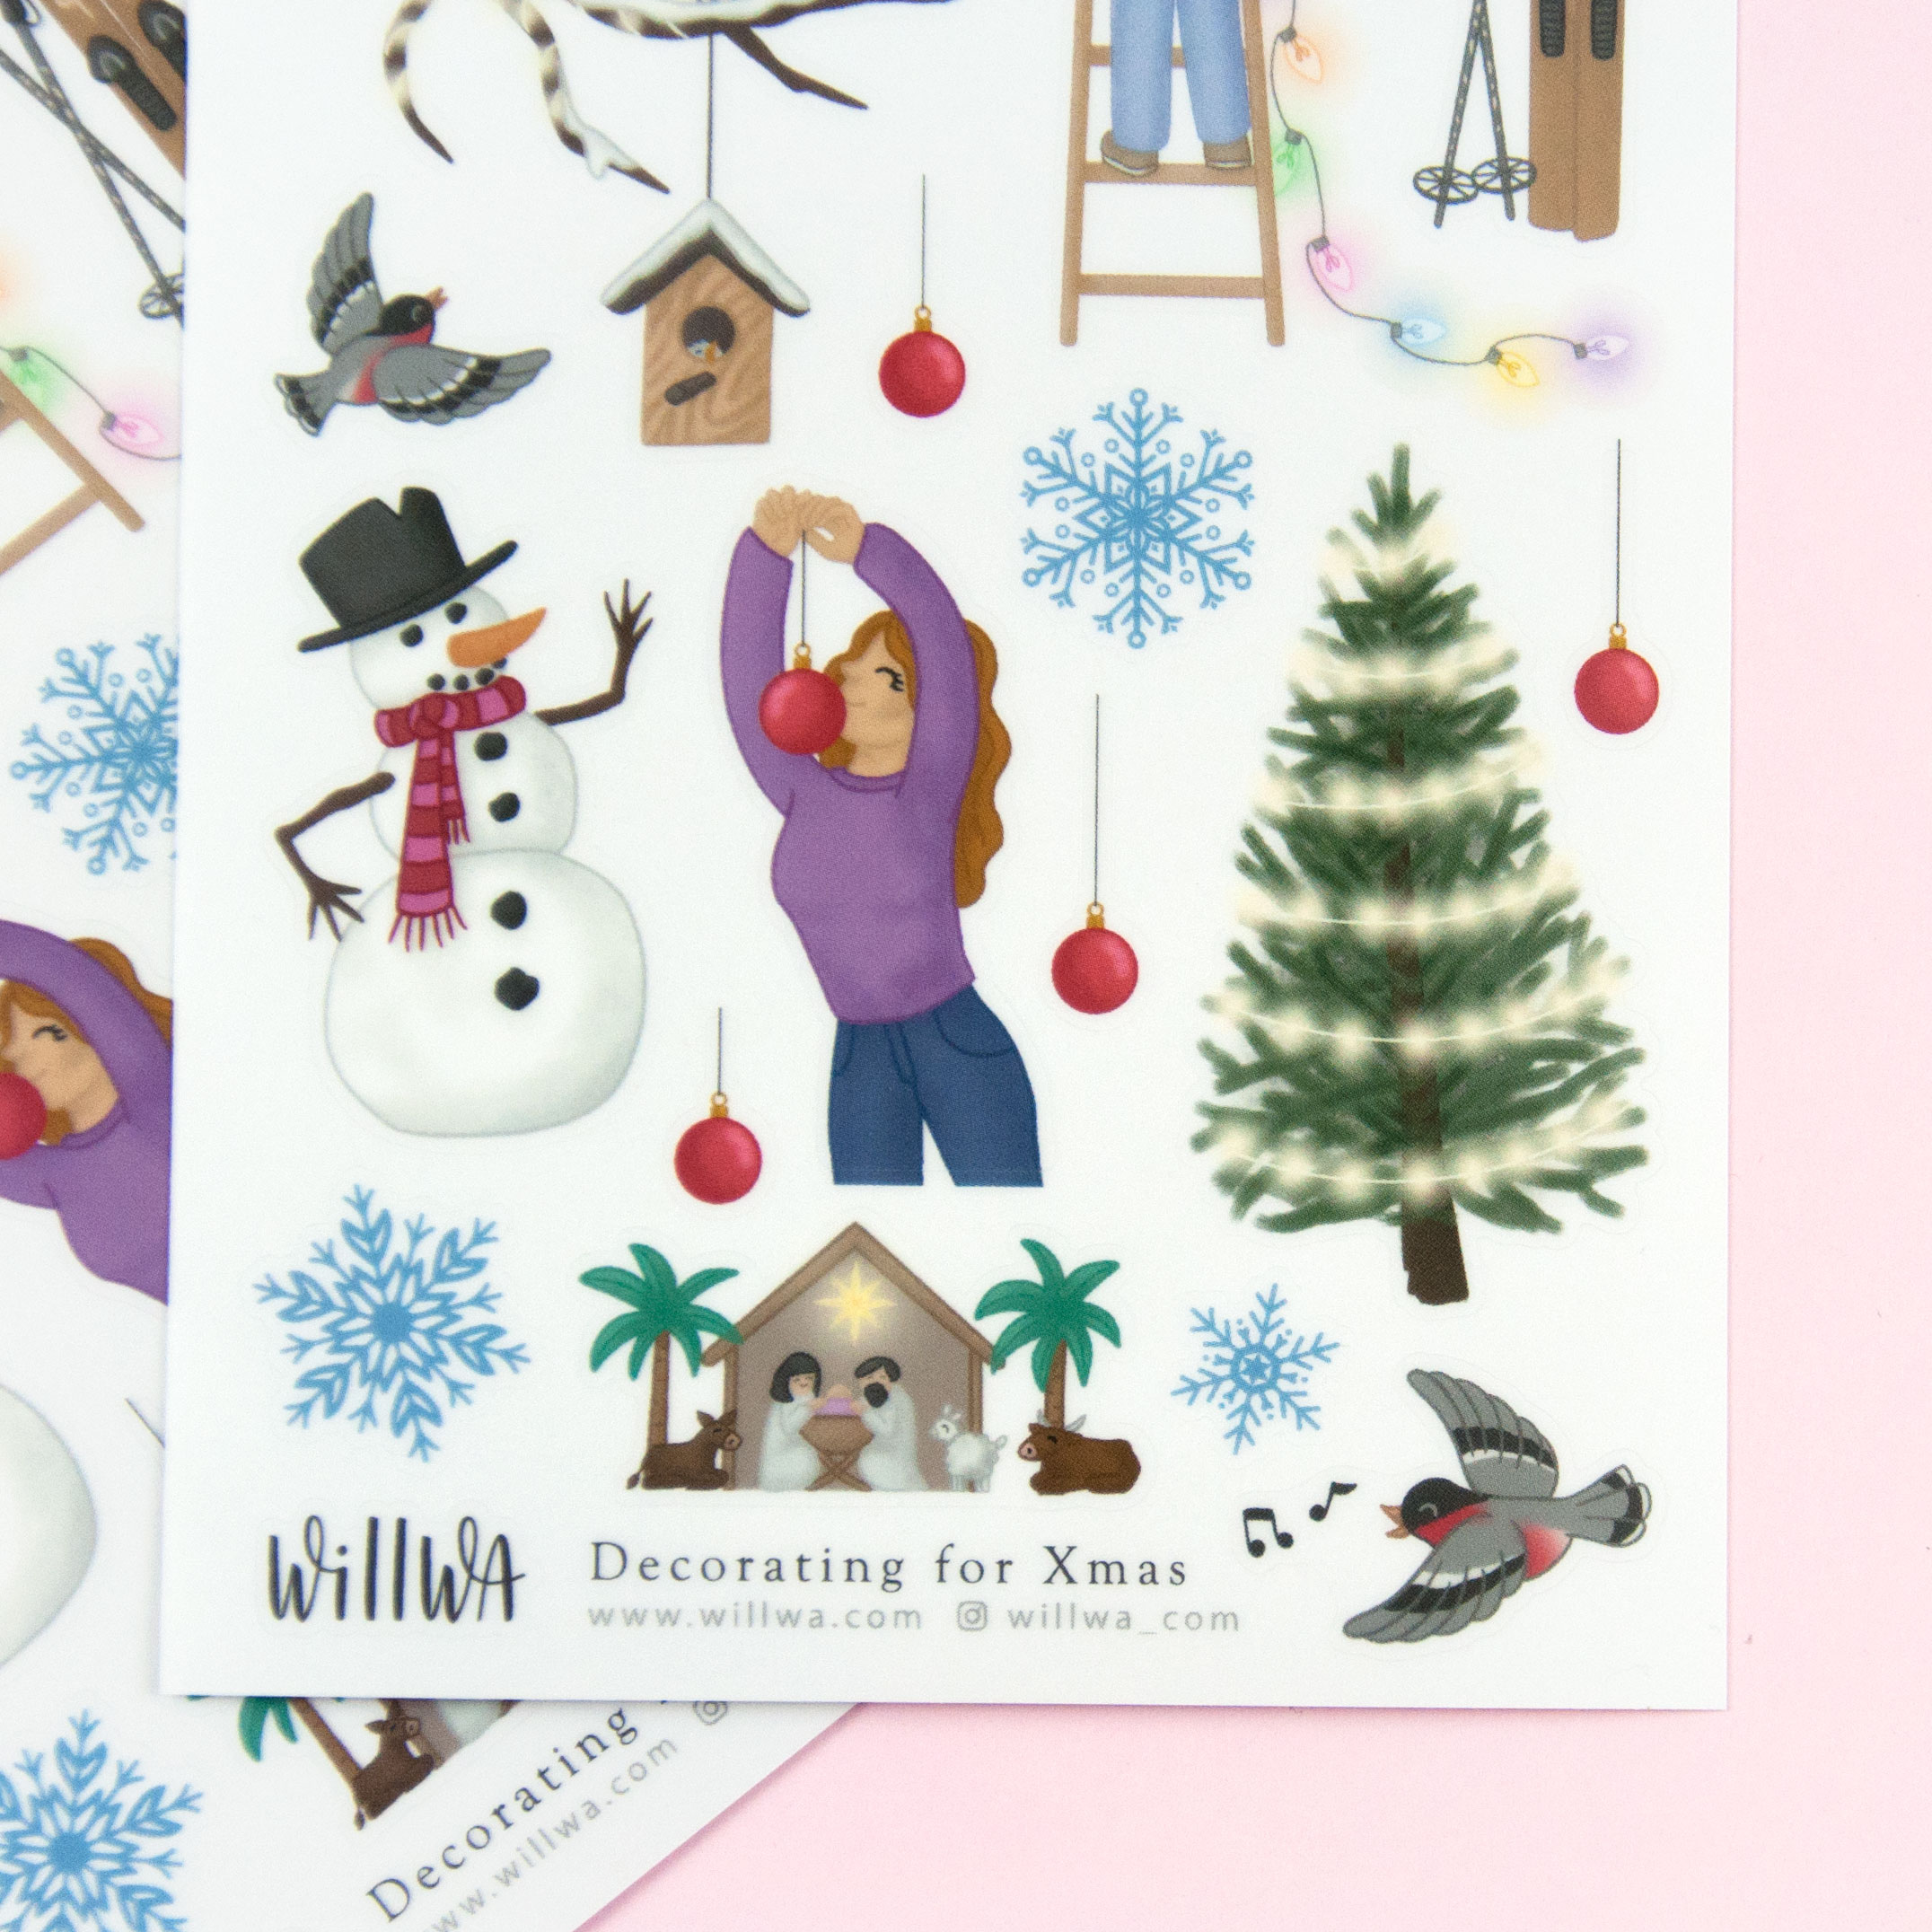 Decorating for Xmas Sticker Sheet - Design by Willwa